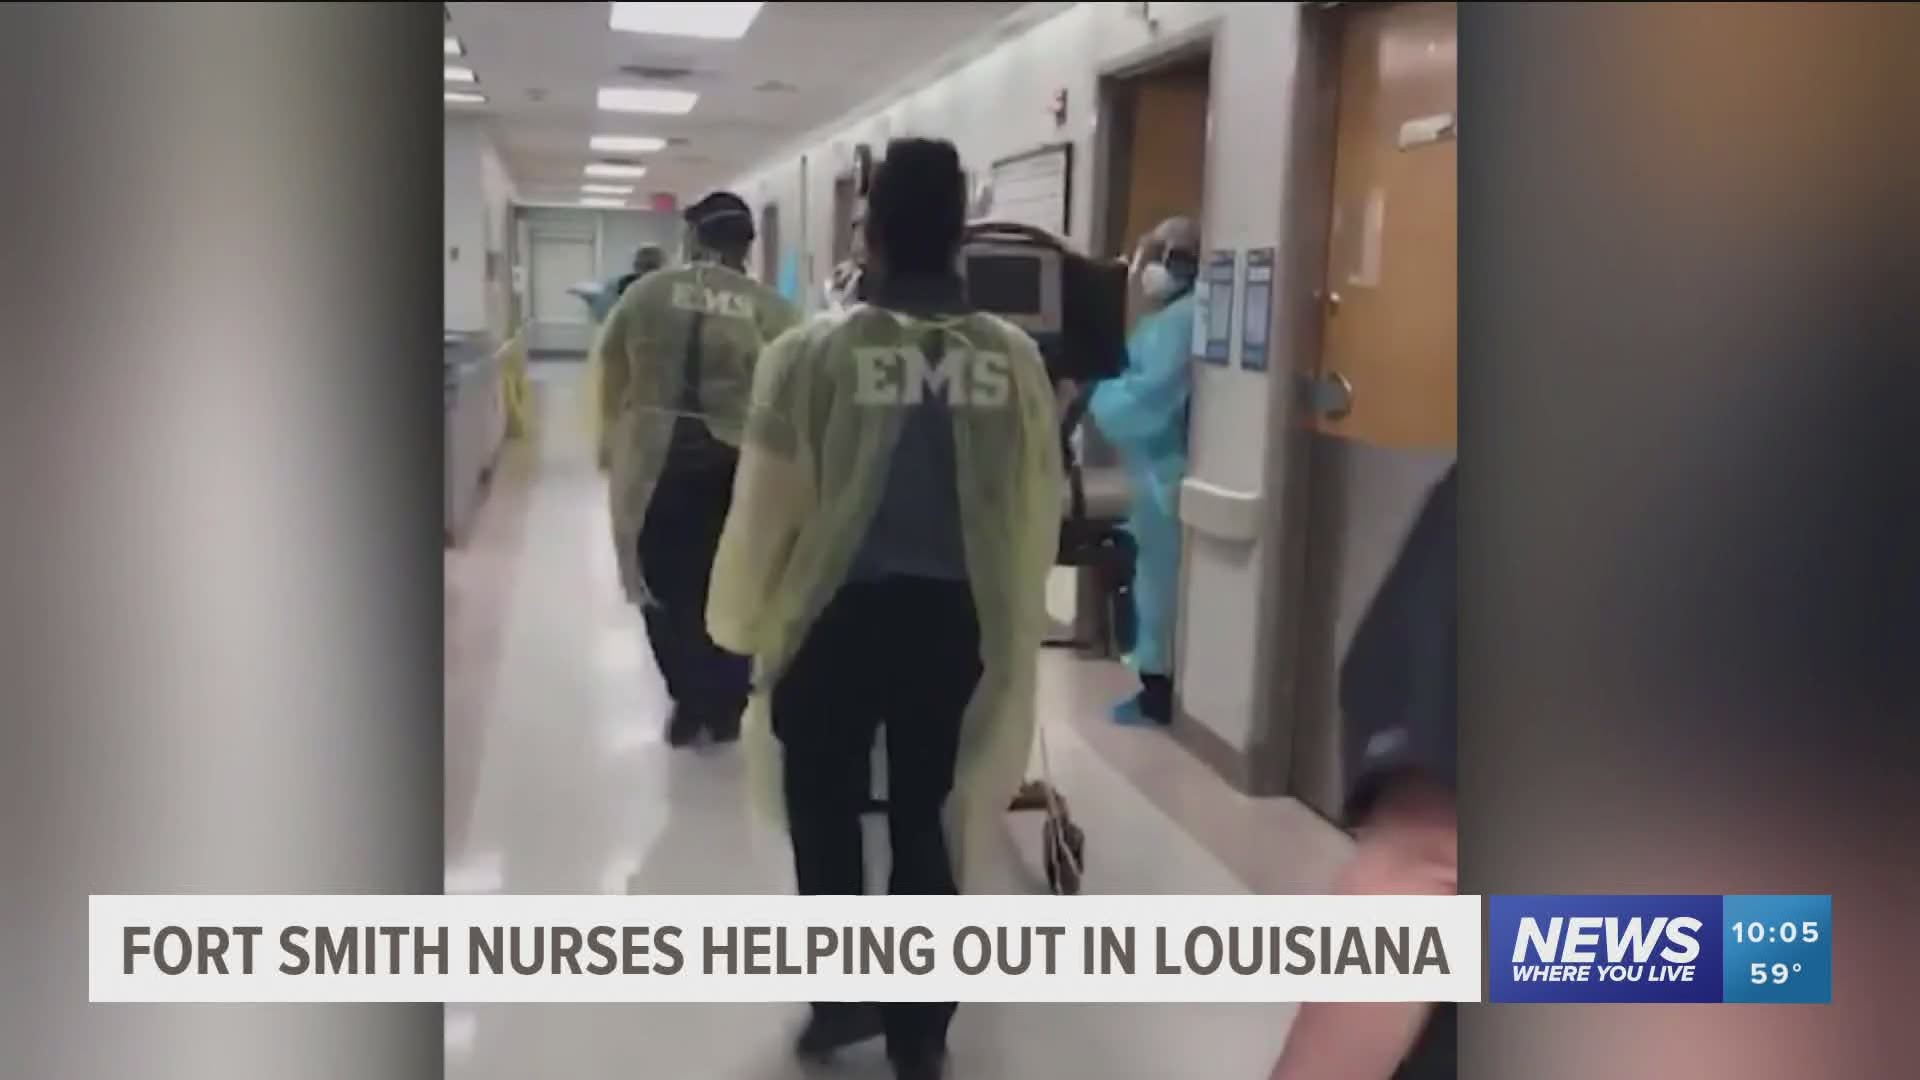 Fort Smith nurses helping out in Louisiana.